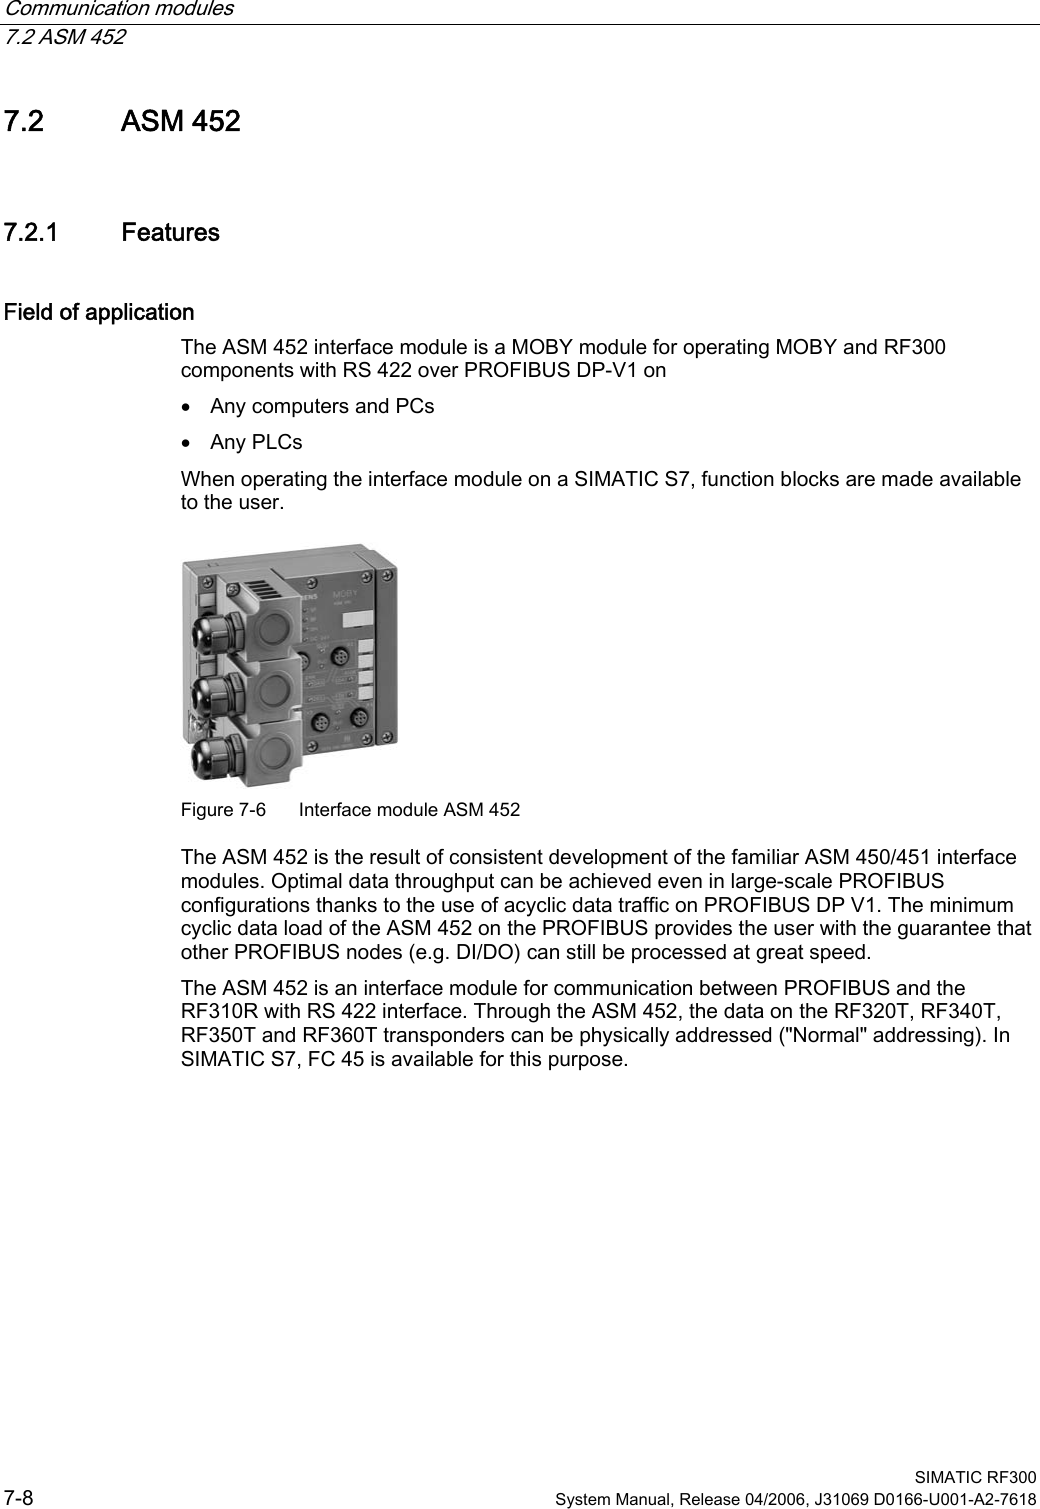 Communication modules 7.2 ASM 452  SIMATIC RF300 7-8  System Manual, Release 04/2006, J31069 D0166-U001-A2-7618 7.2 7.2 ASM 452 7.2.1  Features Field of application The ASM 452 interface module is a MOBY module for operating MOBY and RF300 components with RS 422 over PROFIBUS DP-V1 on • Any computers and PCs • Any PLCs When operating the interface module on a SIMATIC S7, function blocks are made available to the user.  Figure 7-6  Interface module ASM 452 The ASM 452 is the result of consistent development of the familiar ASM 450/451 interface modules. Optimal data throughput can be achieved even in large-scale PROFIBUS configurations thanks to the use of acyclic data traffic on PROFIBUS DP V1. The minimum cyclic data load of the ASM 452 on the PROFIBUS provides the user with the guarantee that other PROFIBUS nodes (e.g. DI/DO) can still be processed at great speed. The ASM 452 is an interface module for communication between PROFIBUS and the RF310R with RS 422 interface. Through the ASM 452, the data on the RF320T, RF340T, RF350T and RF360T transponders can be physically addressed (&quot;Normal&quot; addressing). In SIMATIC S7, FC 45 is available for this purpose. 